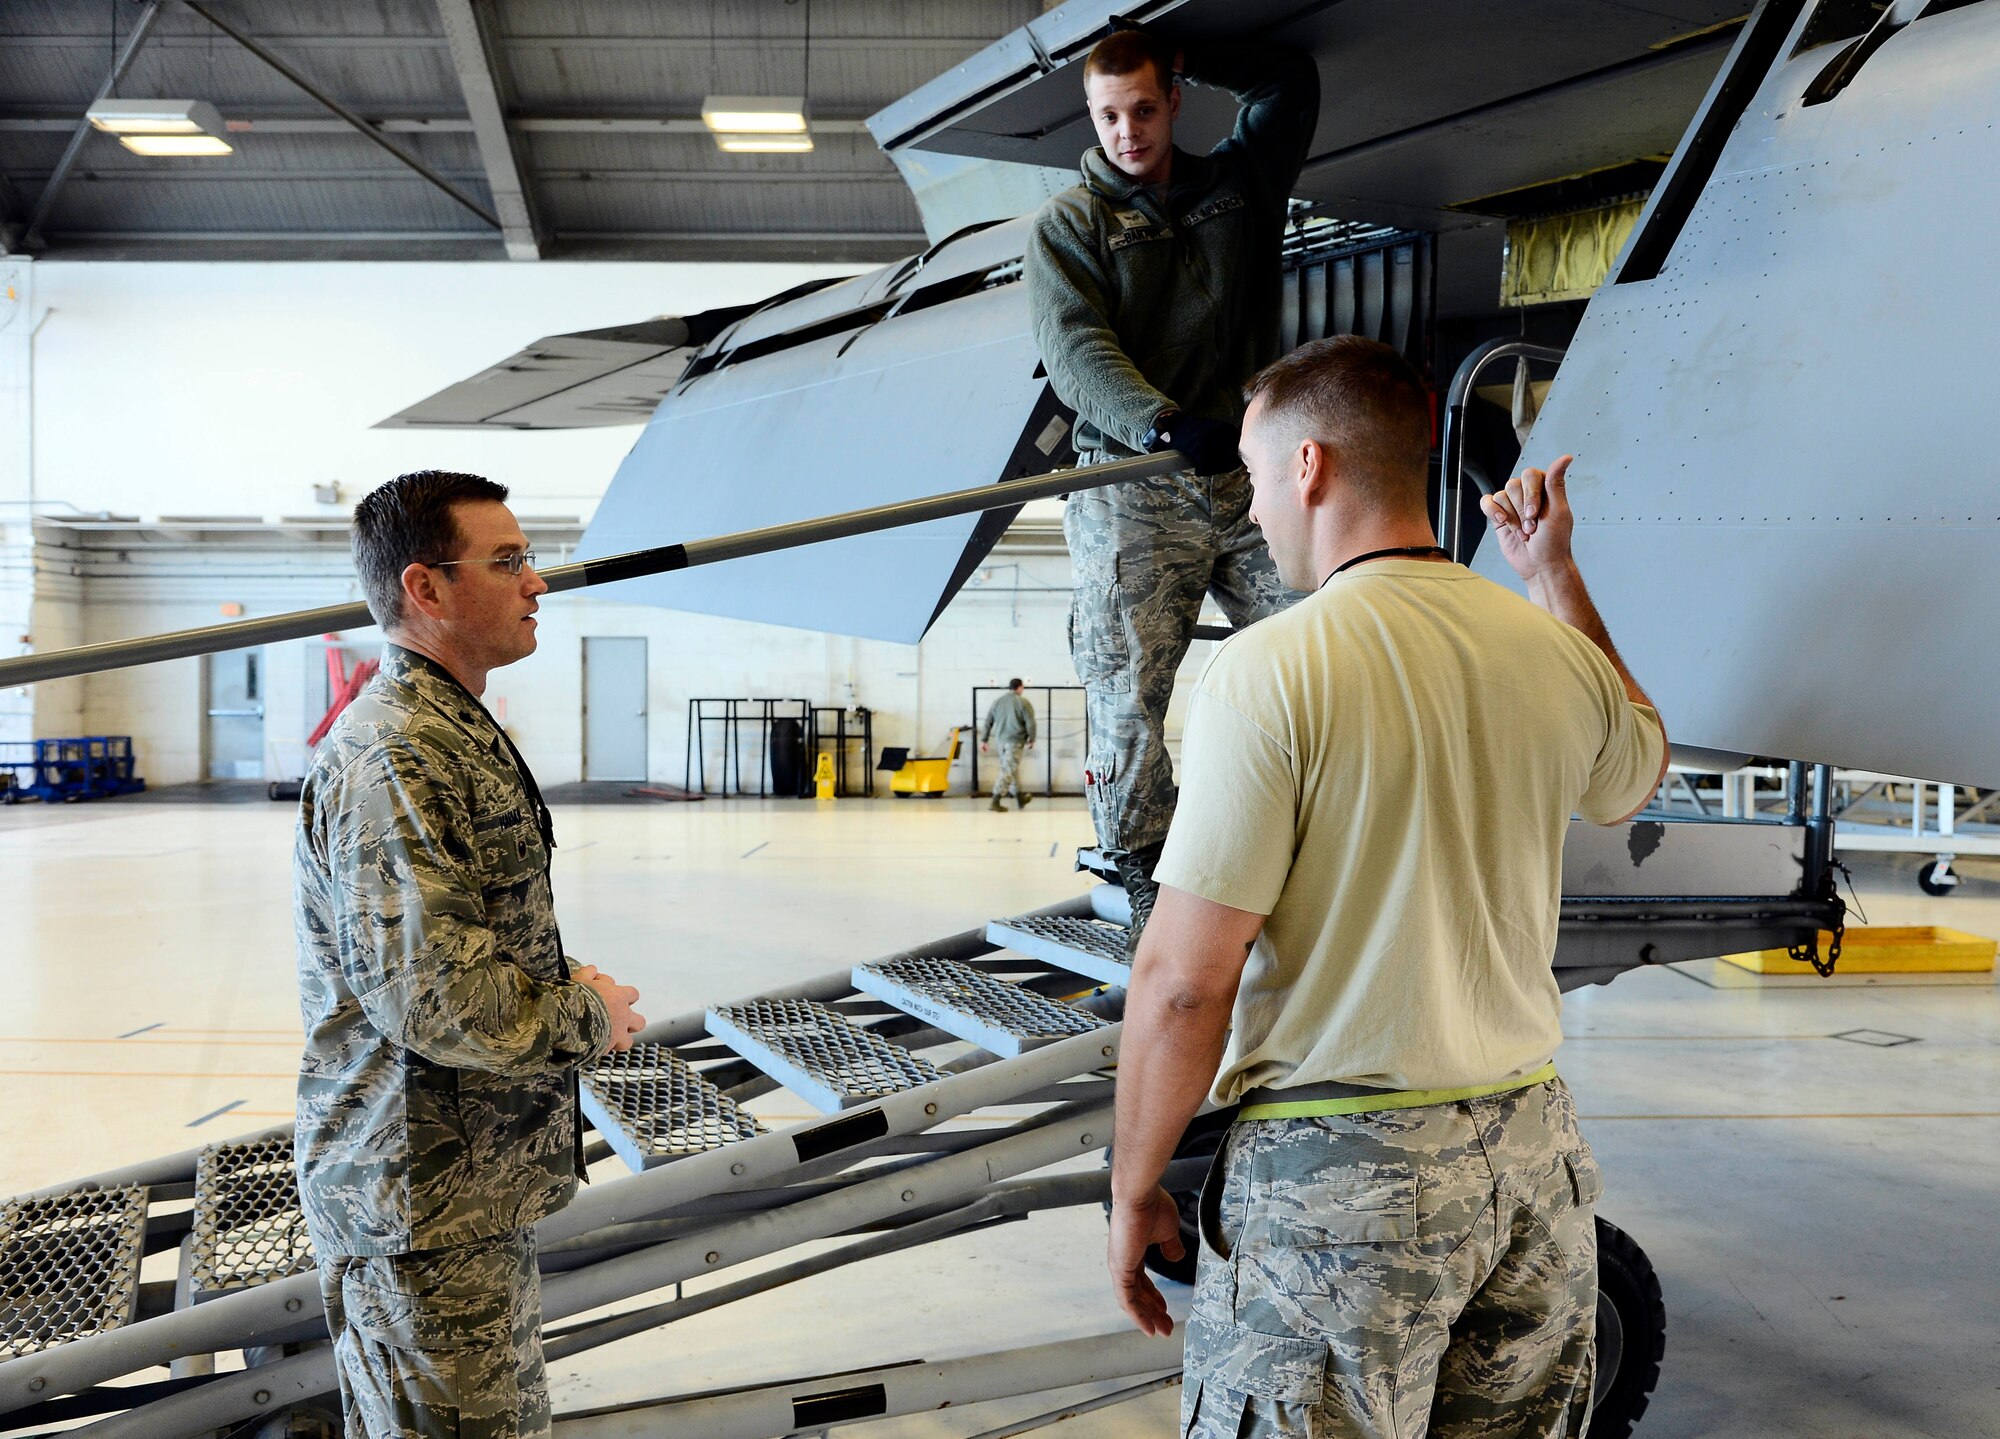 Lt. Col. Jeremy Harmon, deputy commander of the 6th Maintenance Group, talks with Airmen about a current isochronal inspection at MacDill Air Force Base, Fla., Jan. 21, 2016. Harmon received the 2015 Air Mobility Command Aircraft Maintenance Field Grade Manager award in January for his ability to align his team toward a common goal. (U.S. Air Force photo by Senior Airman Tori Schultz)  